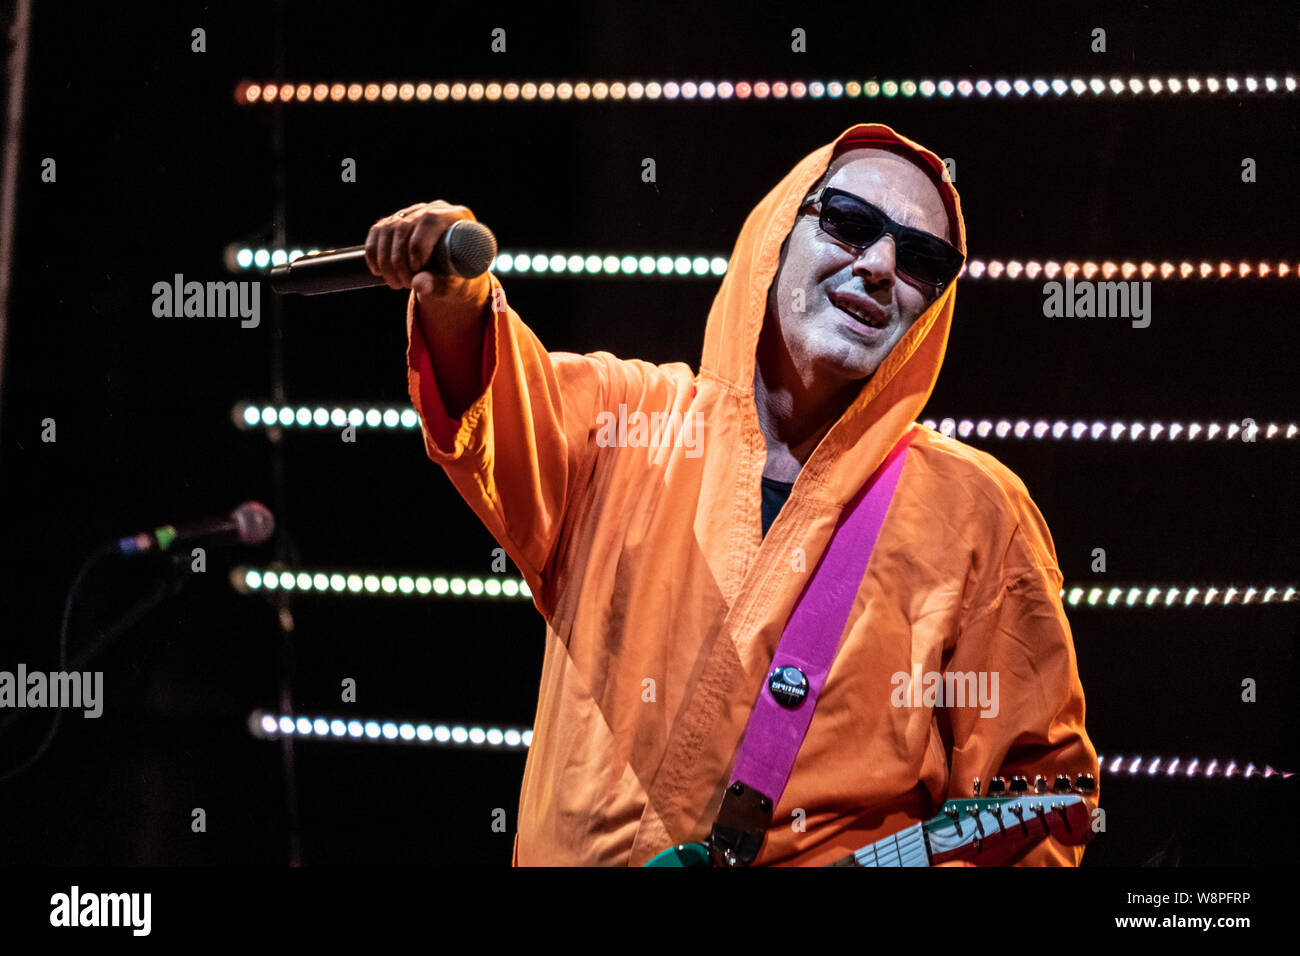 Italian singer and songwriter Luca Carboni, performs live on stage at Cantina dei Colli Ripani in Ripatransone during his “Sputnik Tour 2019”. Stock Photo